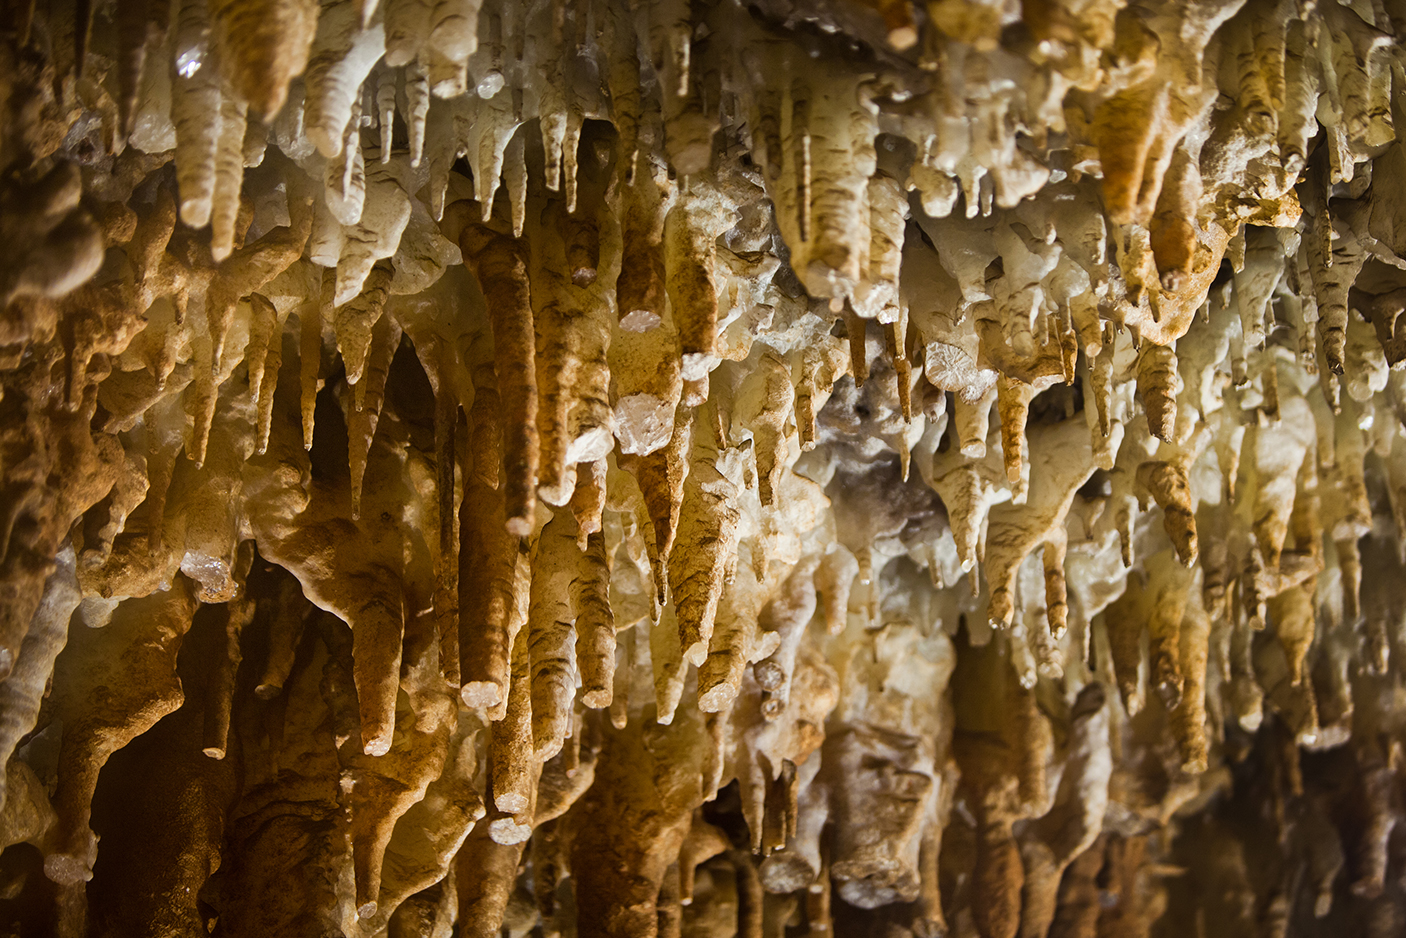 formations in the cave